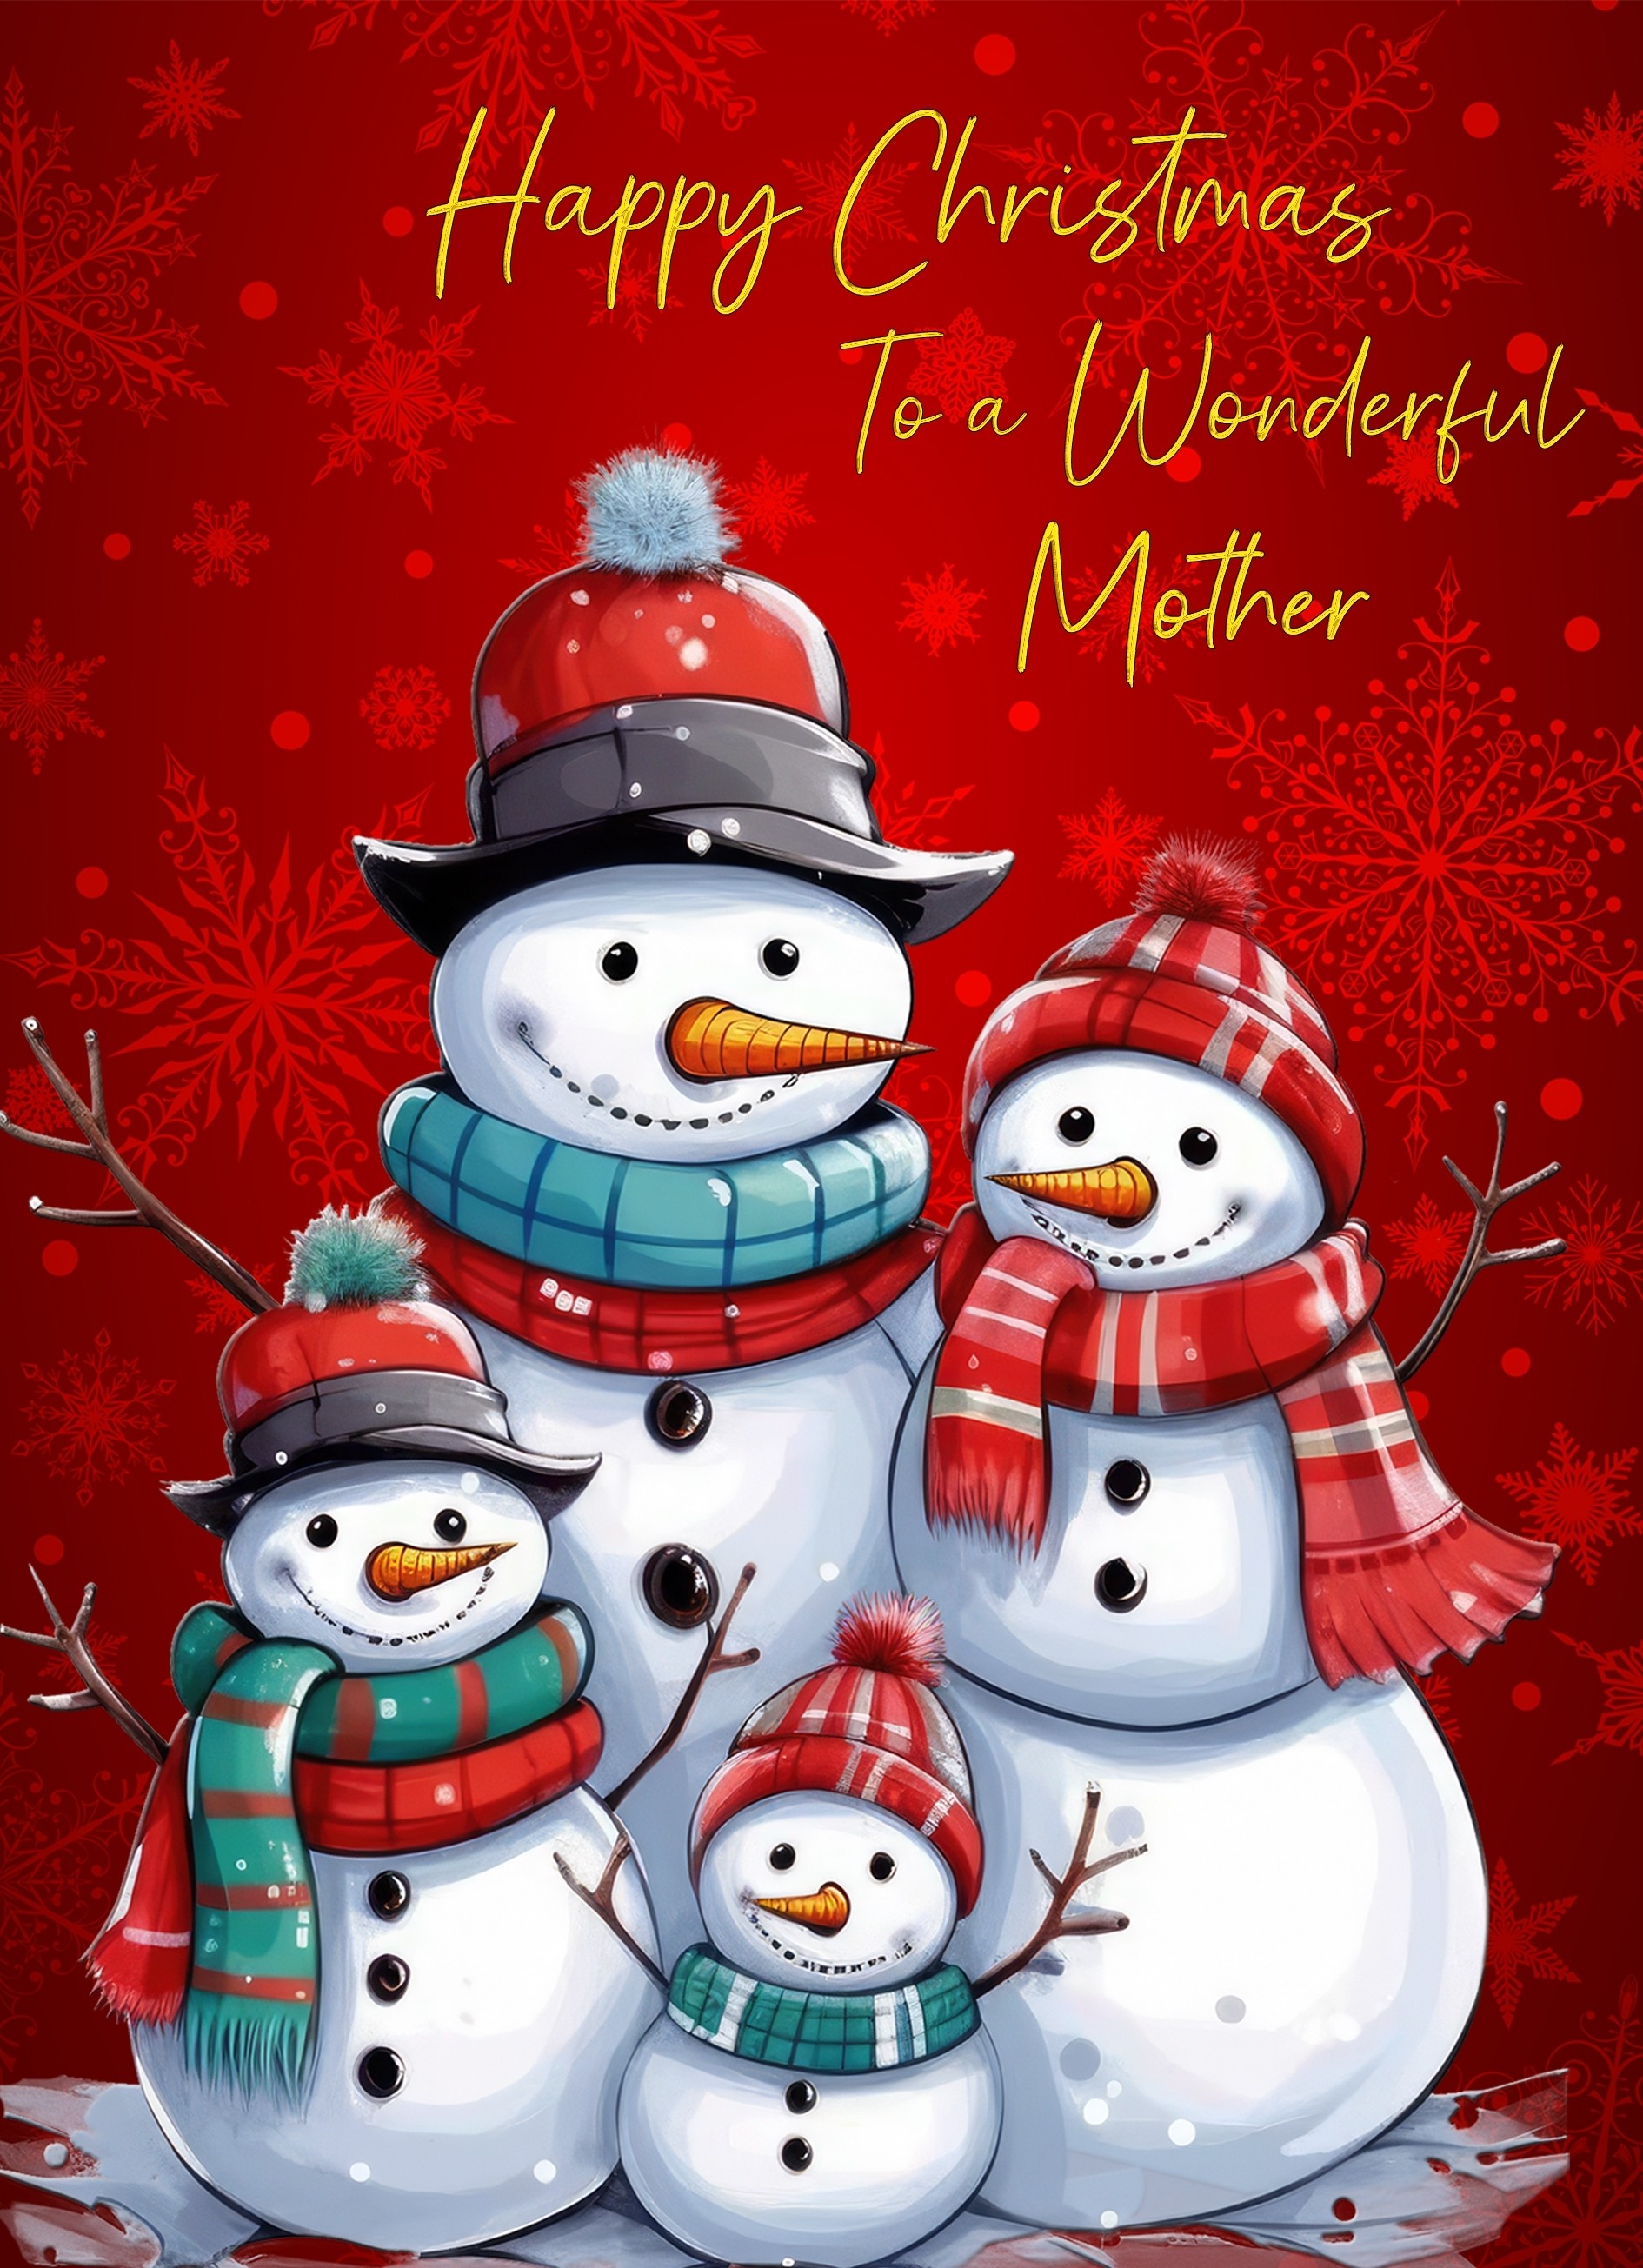 Christmas Card For Mother (Snowman, Design 10)